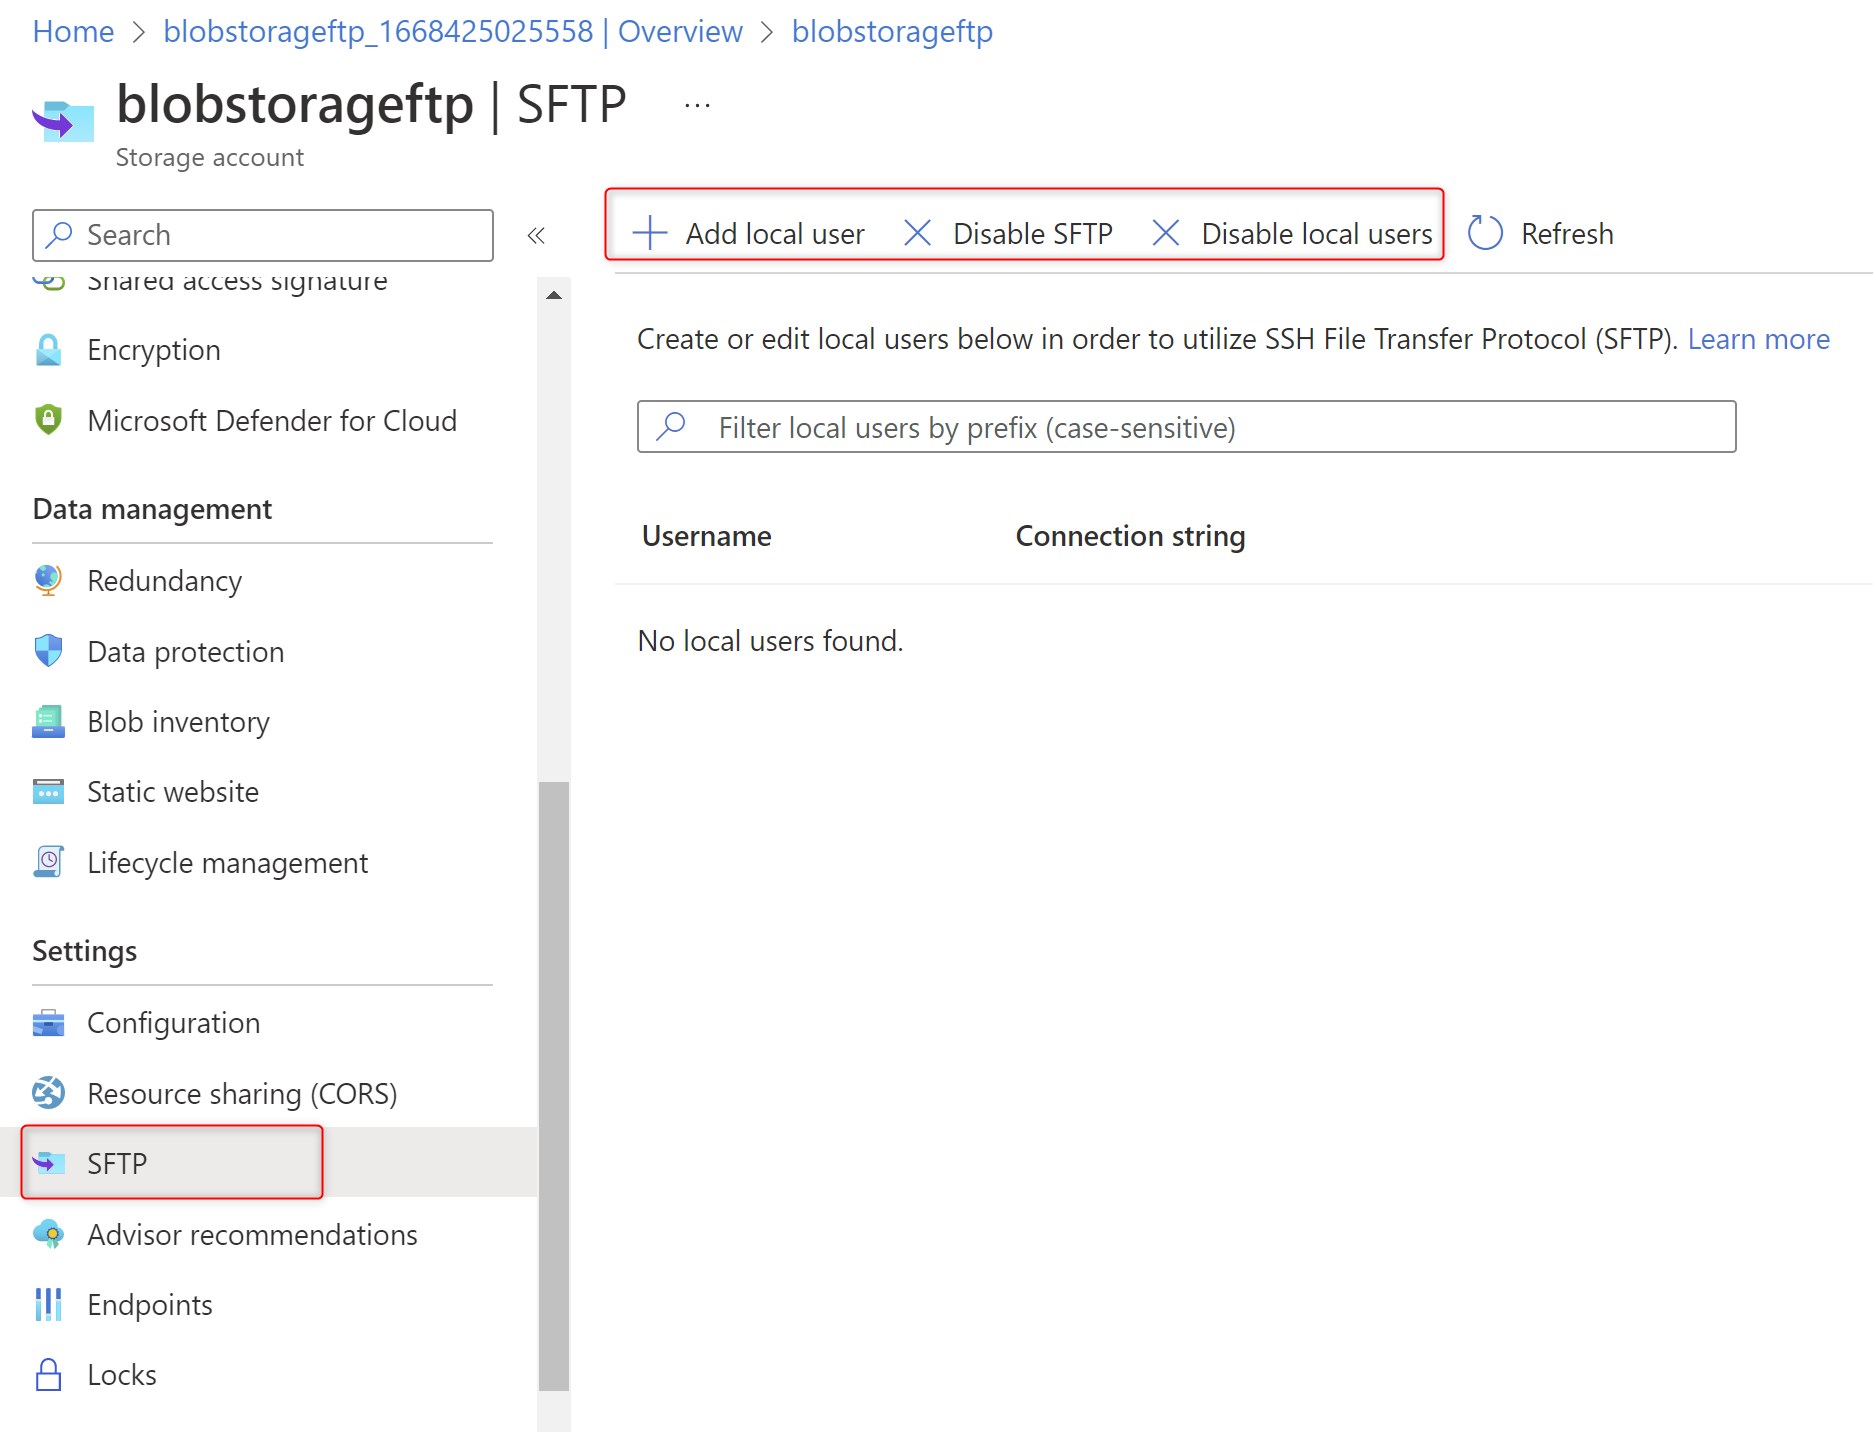 azure-blob-storage-and-sftp-support-stefano-demiliani